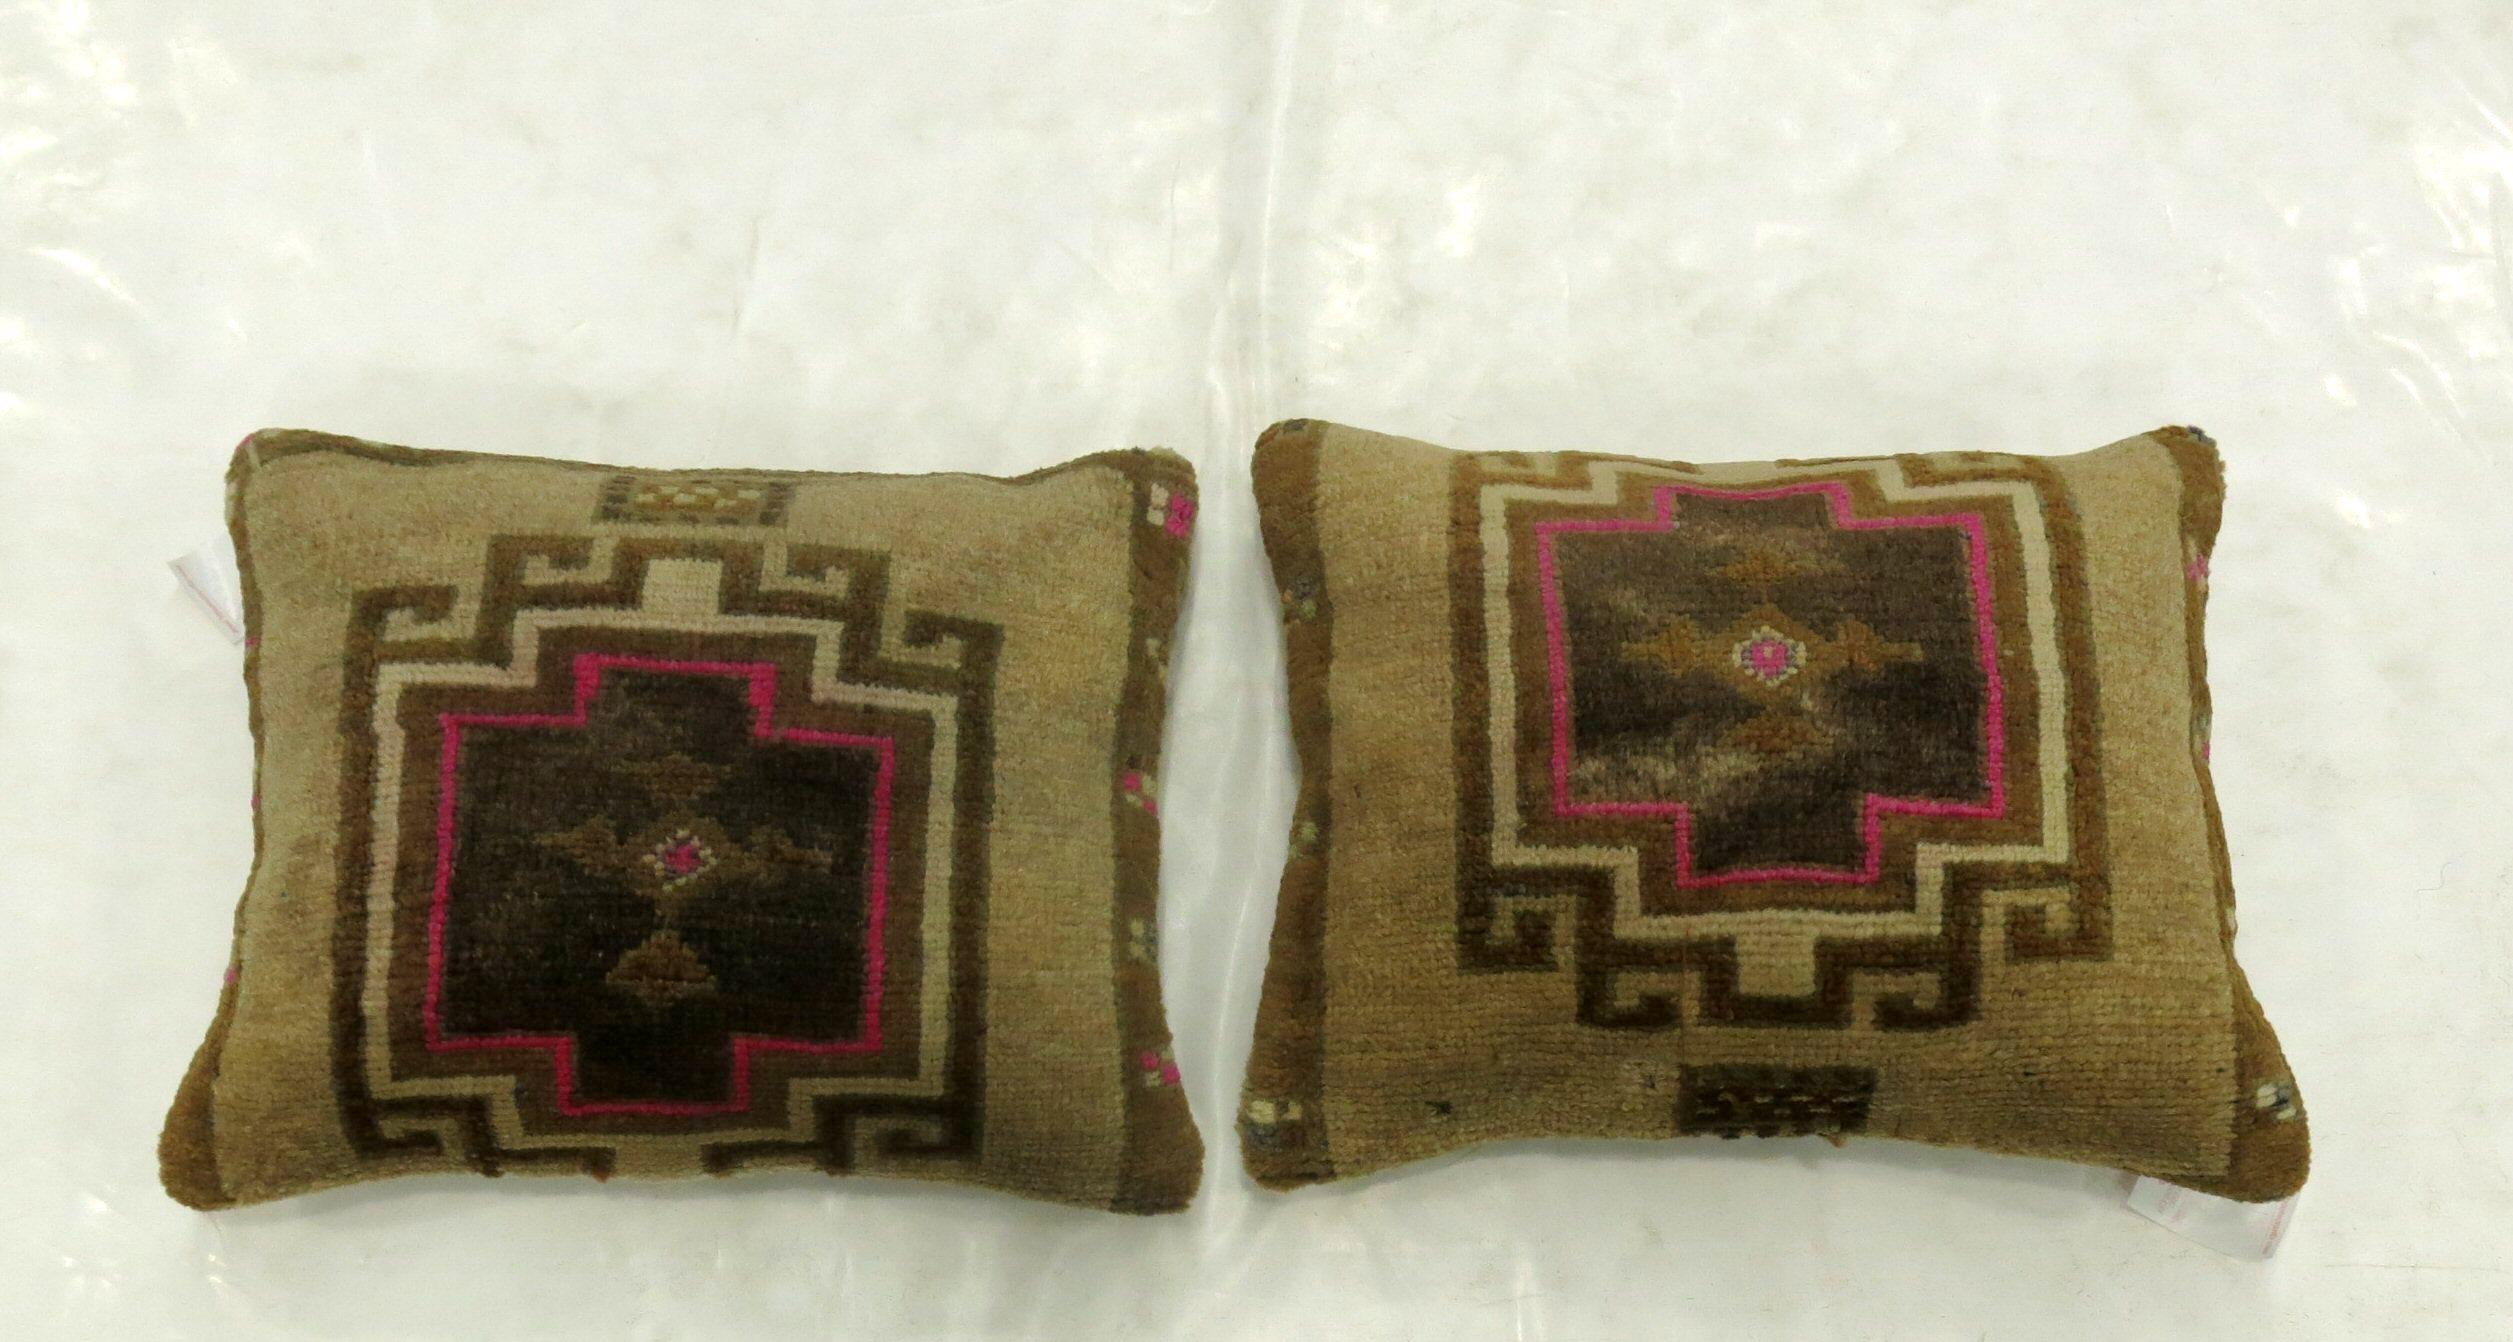 Two pillows made from a Turkish rug with pops of pink. Measuring 16